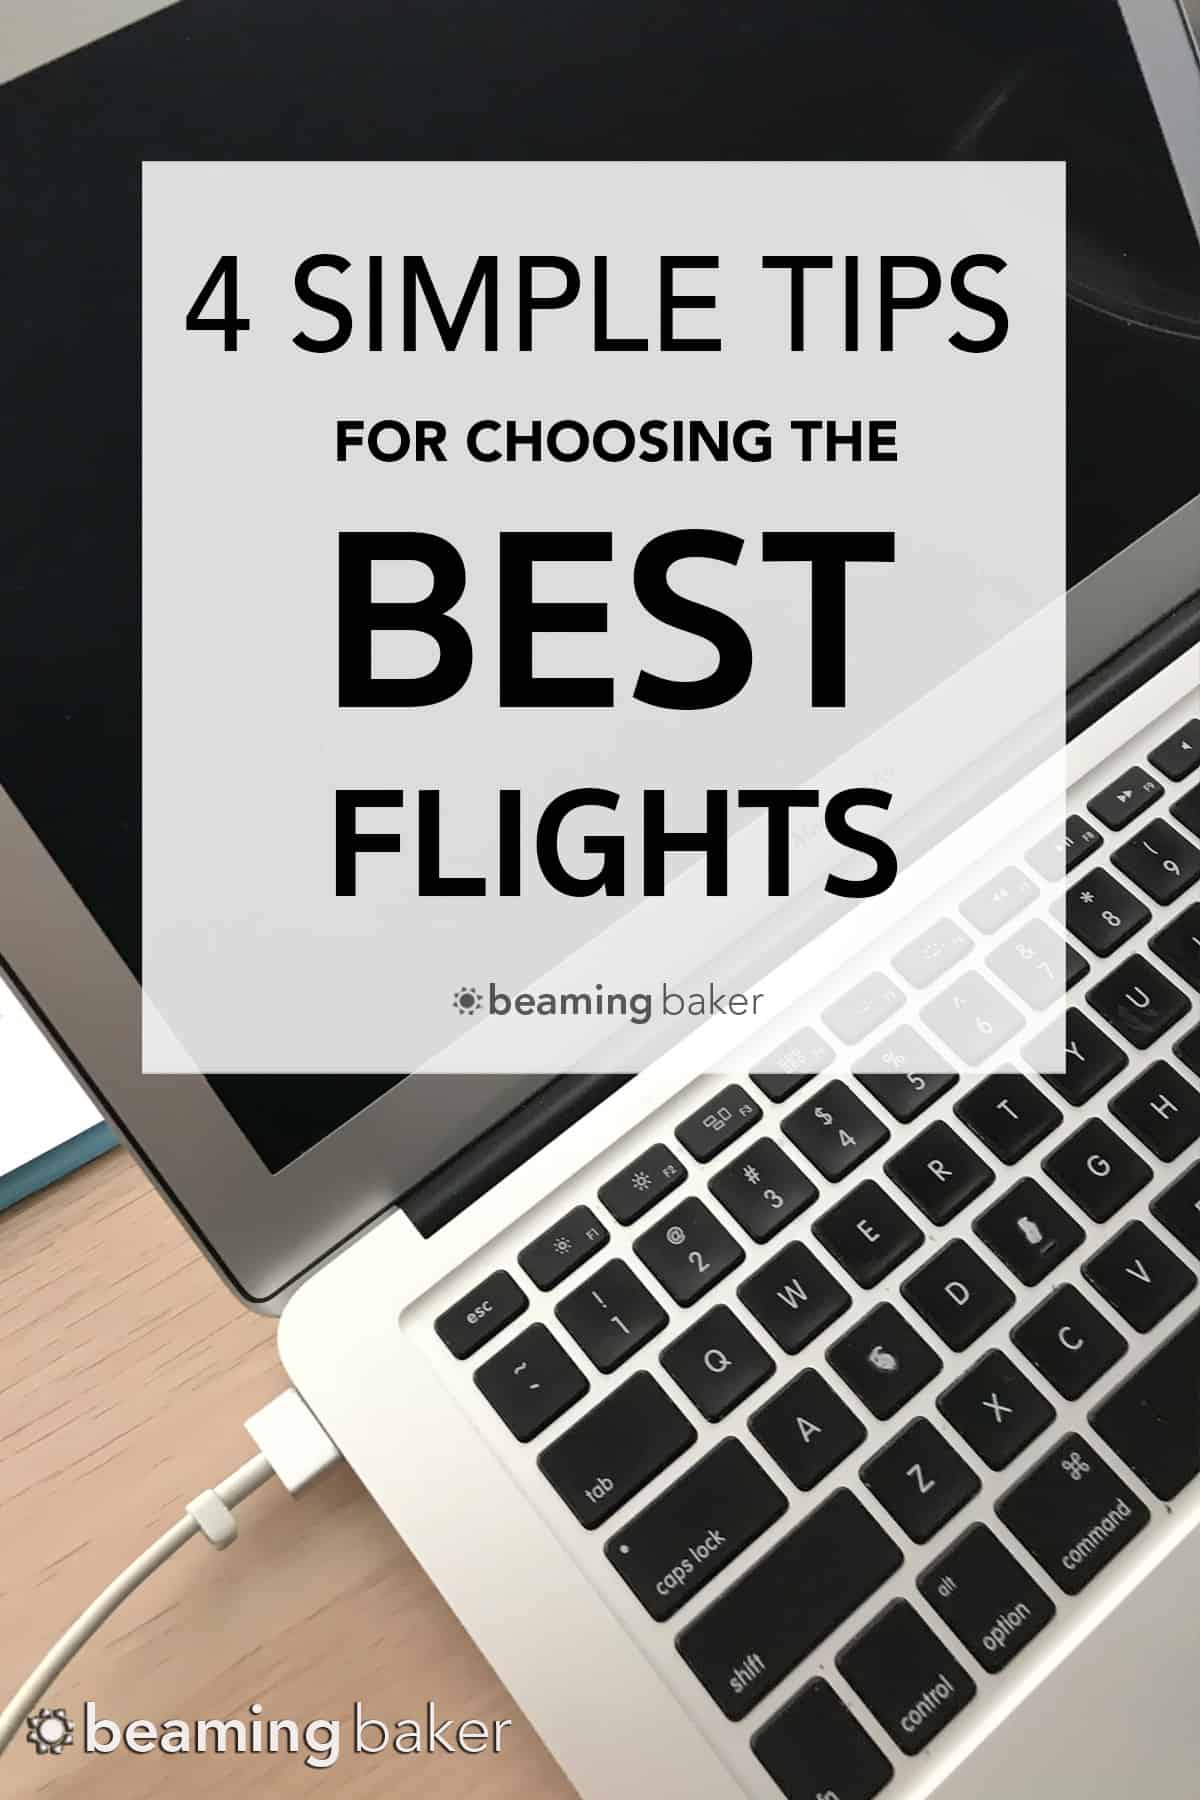 4 simple tips to help you choose the BEST flight for your next trip. Including one trick airlines don’t want you to know about. #travel #traveltips #travelhacks #cheapflights | Post on BeamingBaker.com